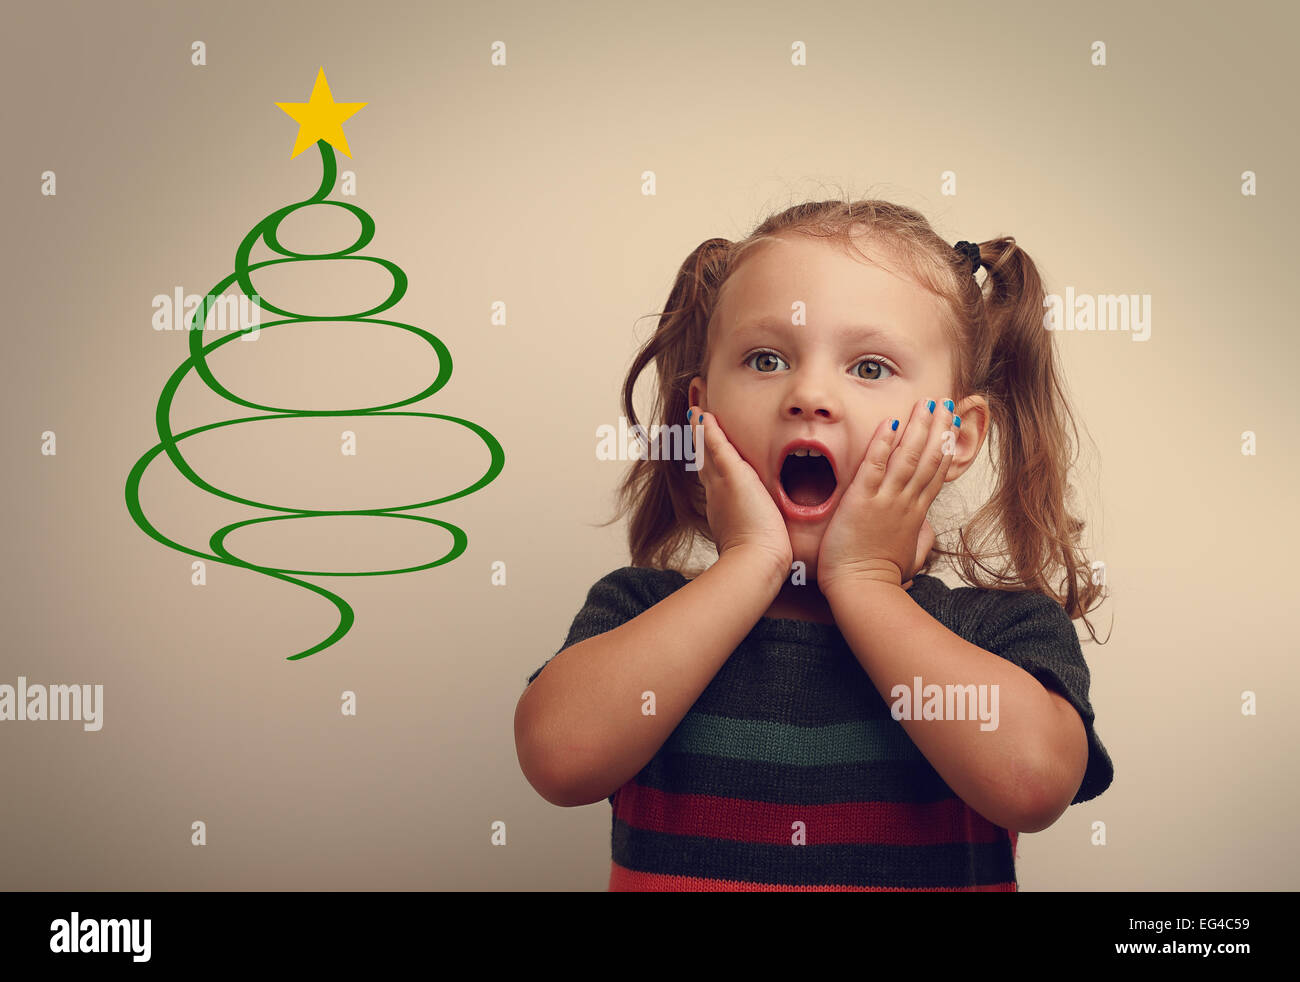 Funny surprising kid girl looking on fur tree illustration with open mouth. Vintage portrait Stock Photo